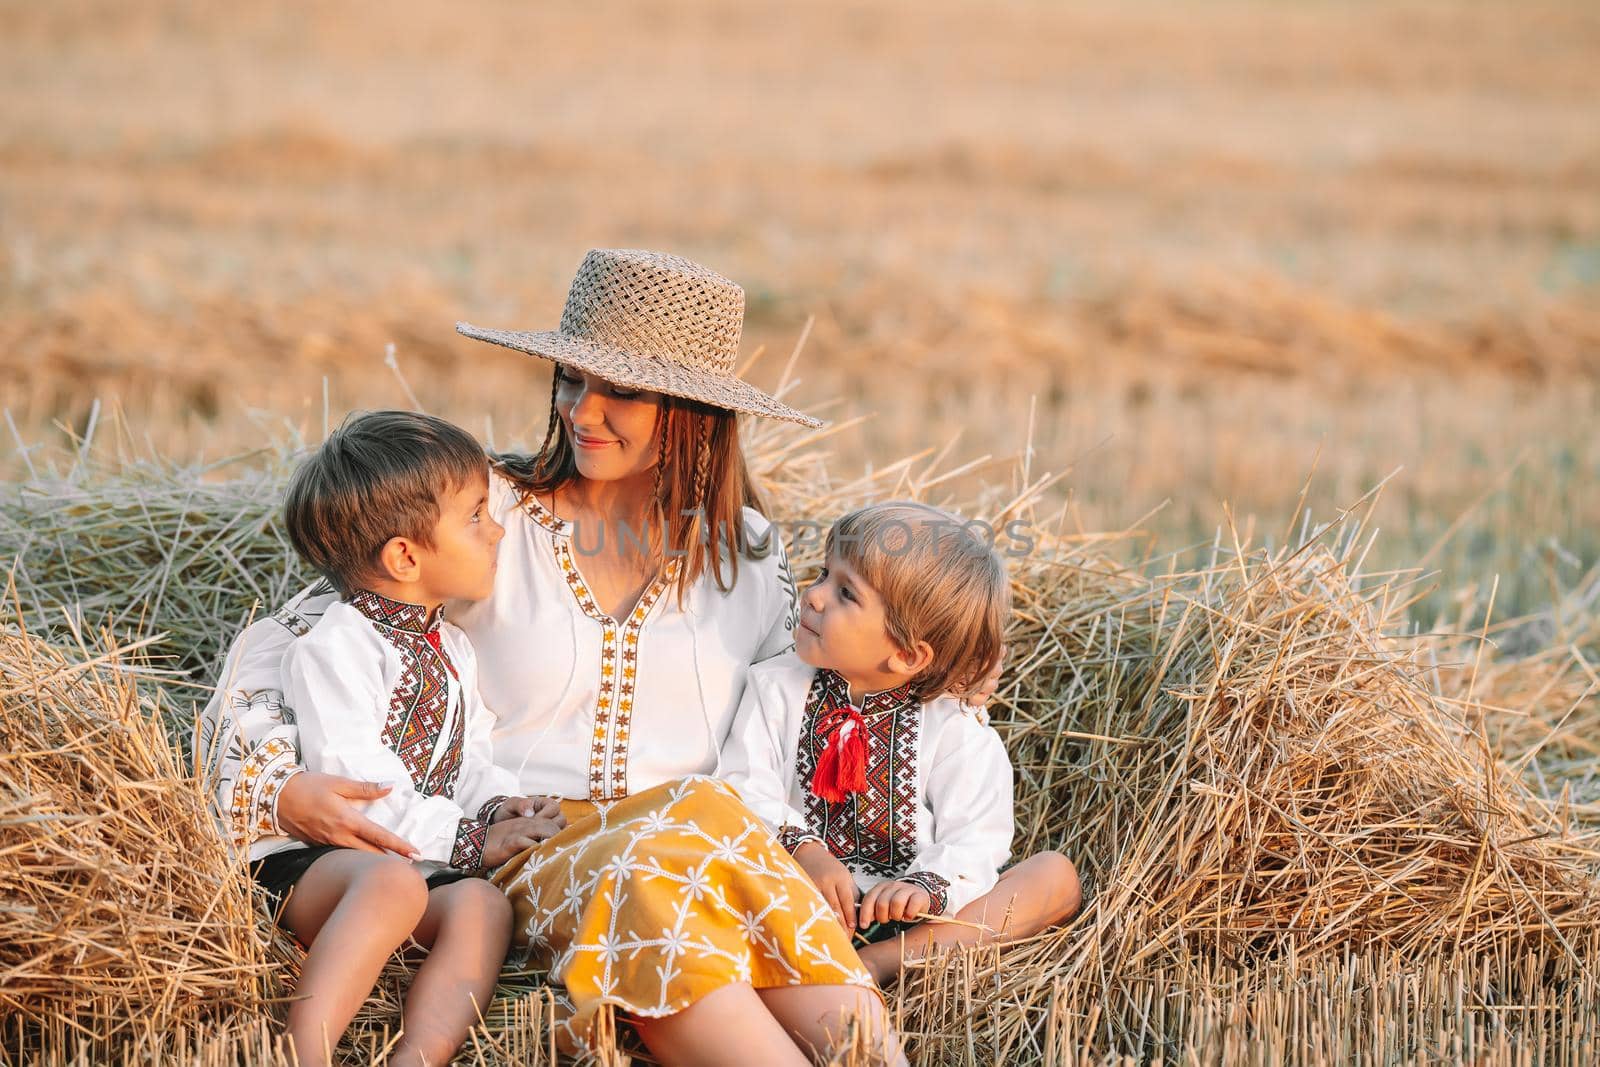 Ukrainian boys and mother sitting together on wheat in field after harvesting. Family, friends holding hands. Children is our future. Happy childhood. High quality photo